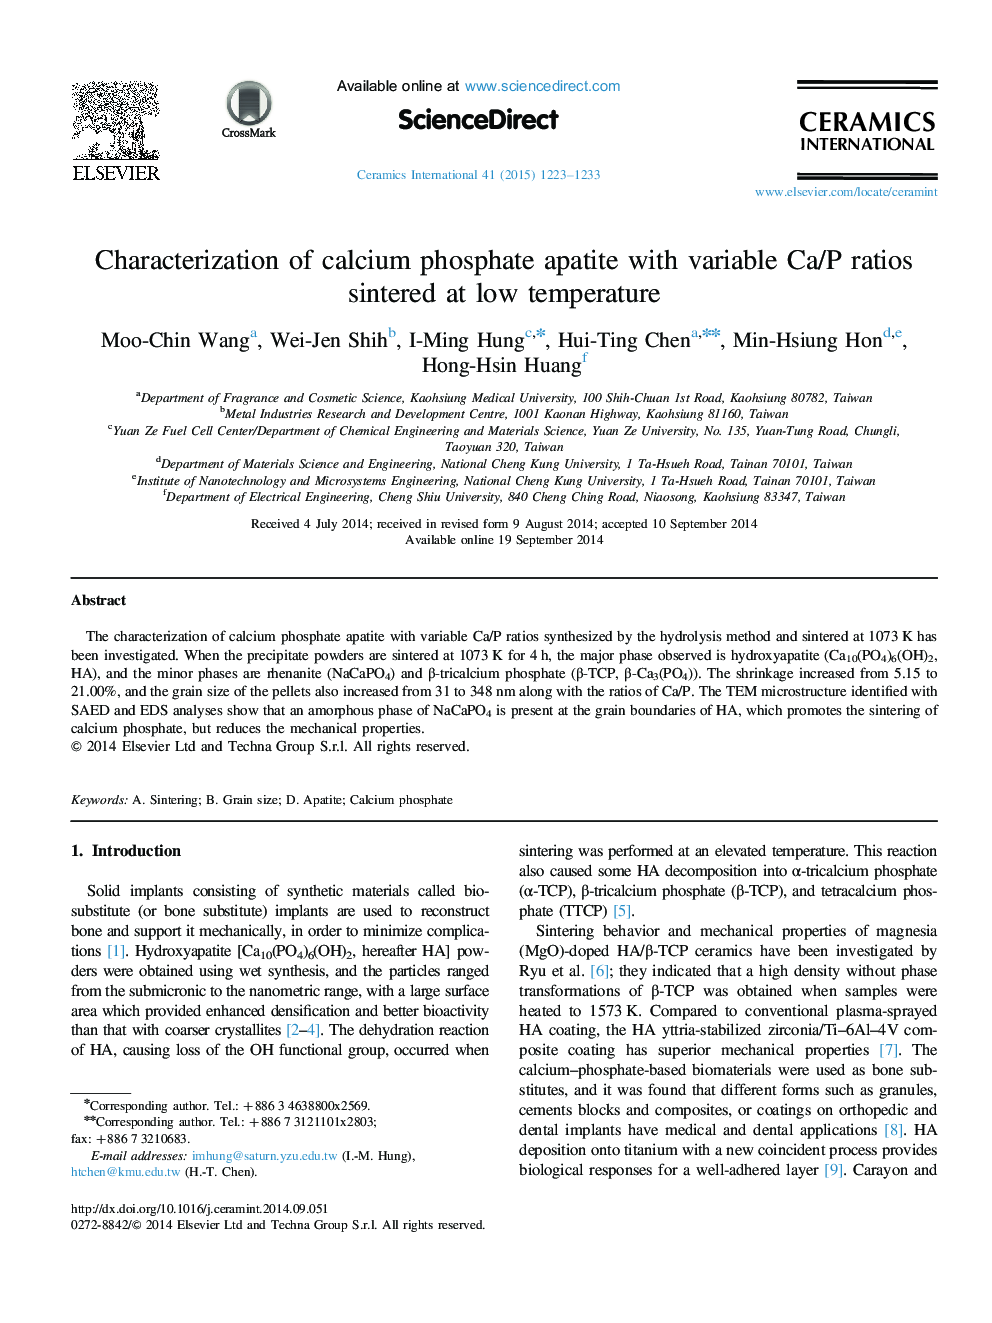 Characterization of calcium phosphate apatite with variable Ca/P ratios sintered at low temperature